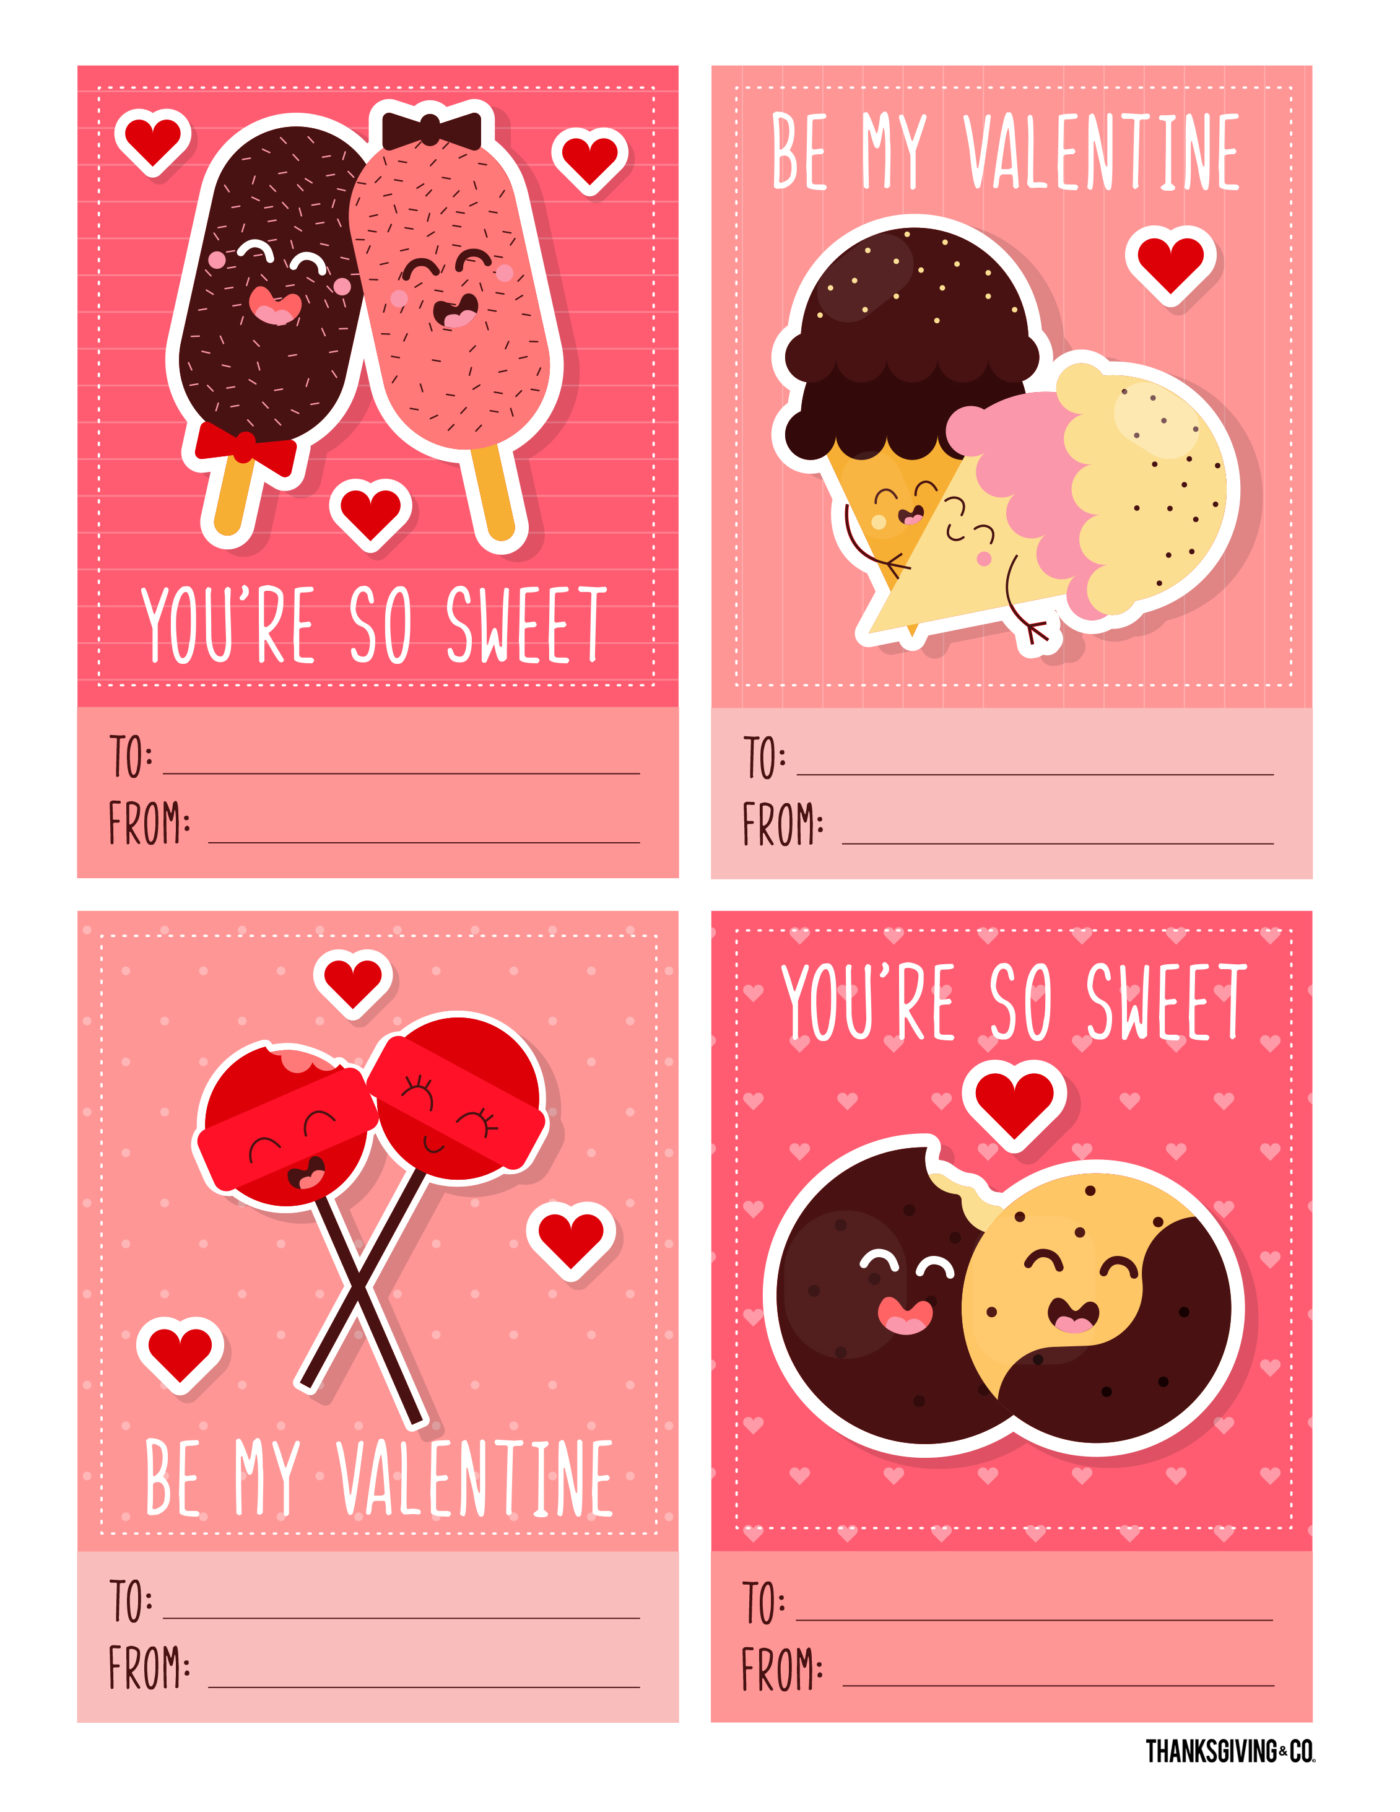 3-free-printable-valentine-s-day-cards-perfect-for-kids-to-share-at-school